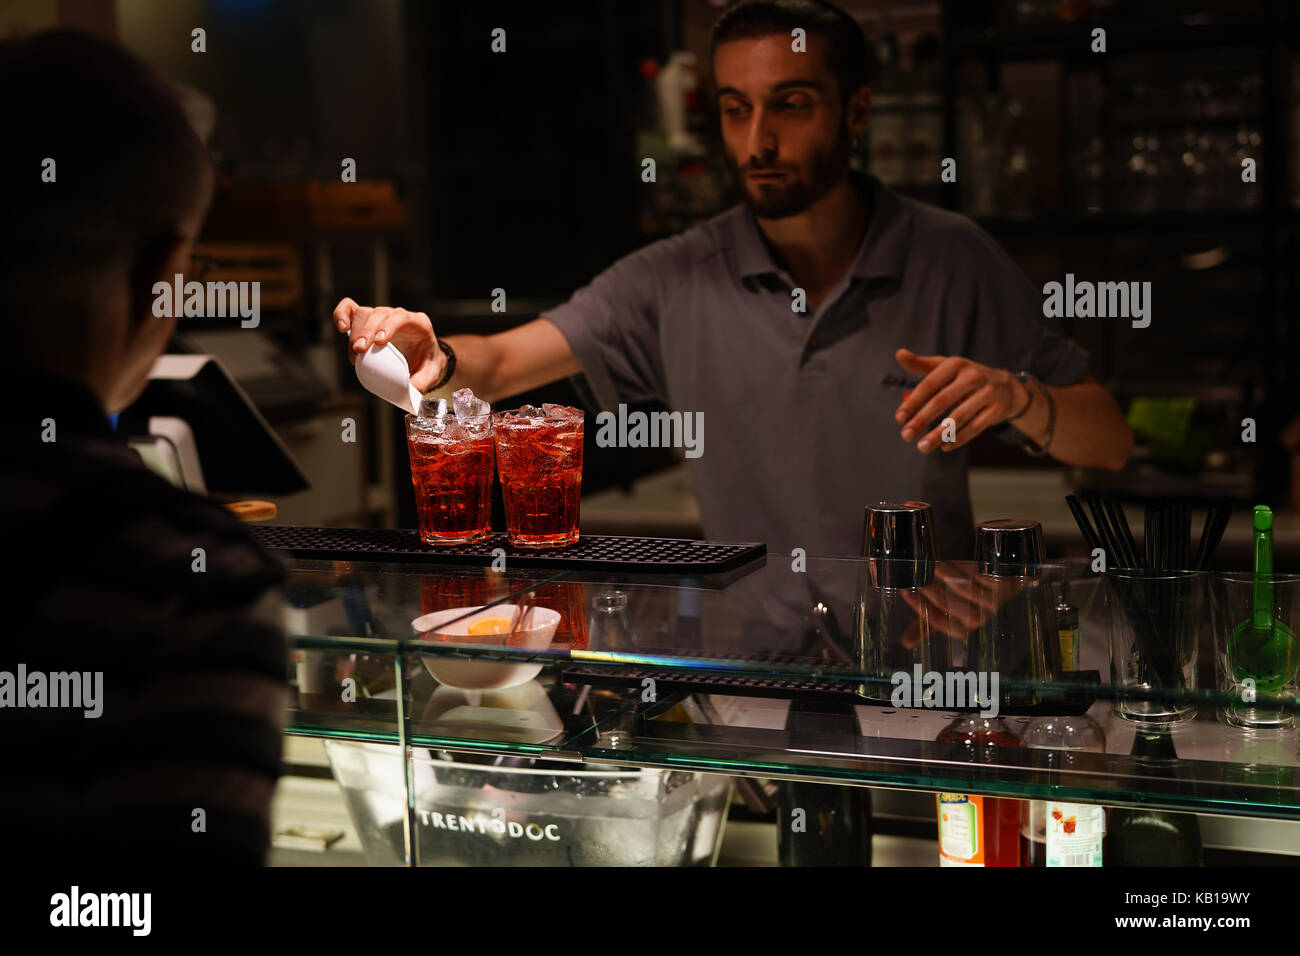 A bar tender serves two traditional spritzer drinks in Bologna. From a series of travel photos in Italy. Photo date: Friday, September 15, 2017. Photo Stock Photo